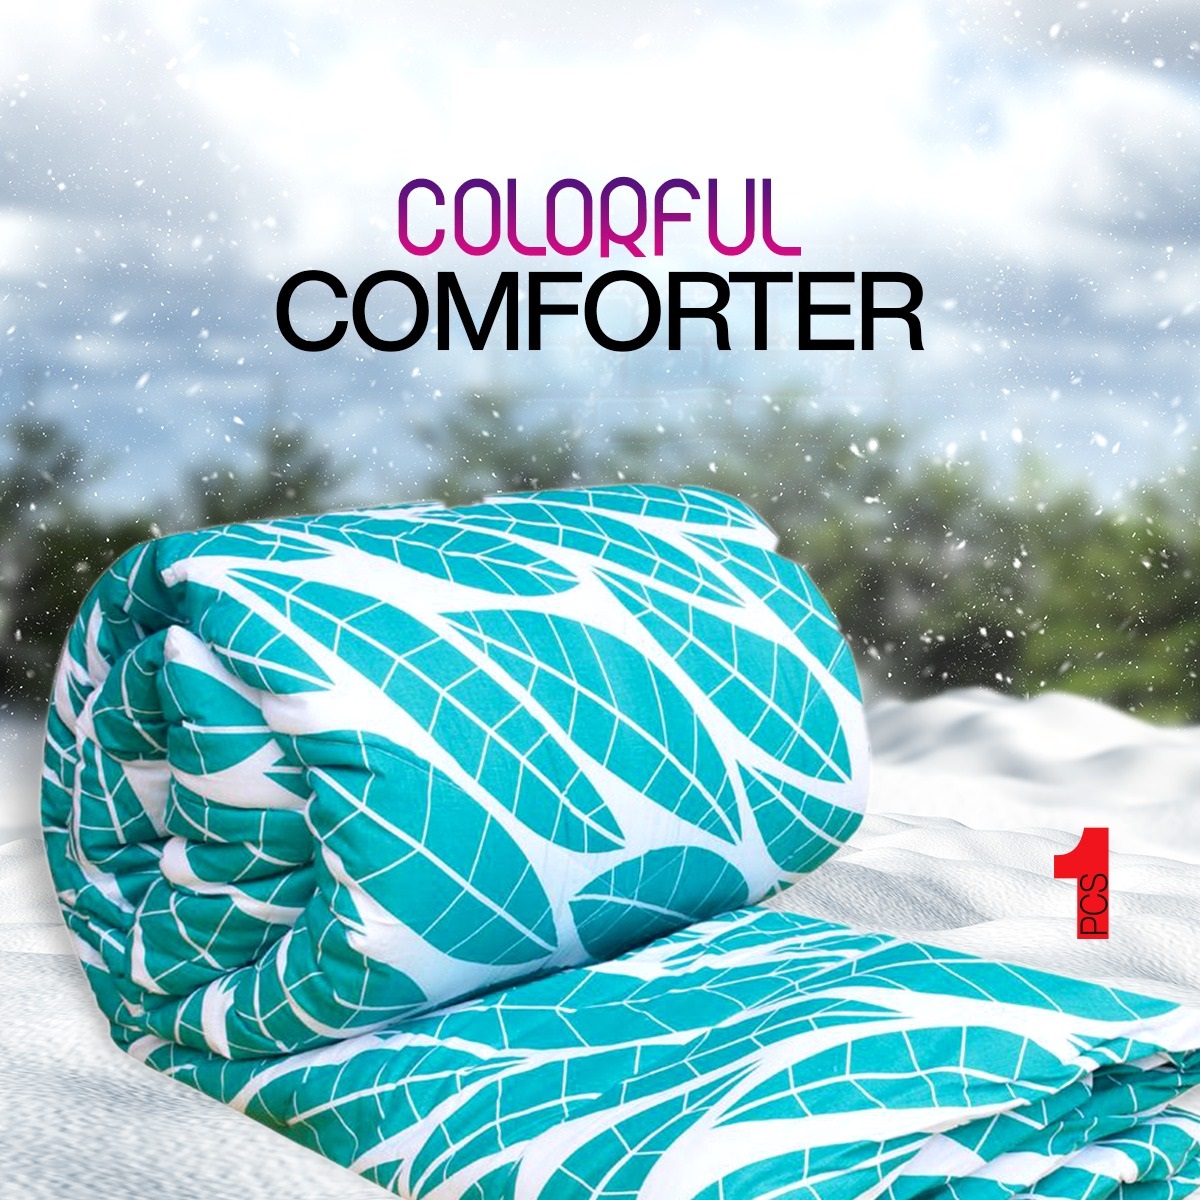 King Size Comforter Cotton Outside Fiber Filler Inside Too Warmth Perfect For Winter - LC010